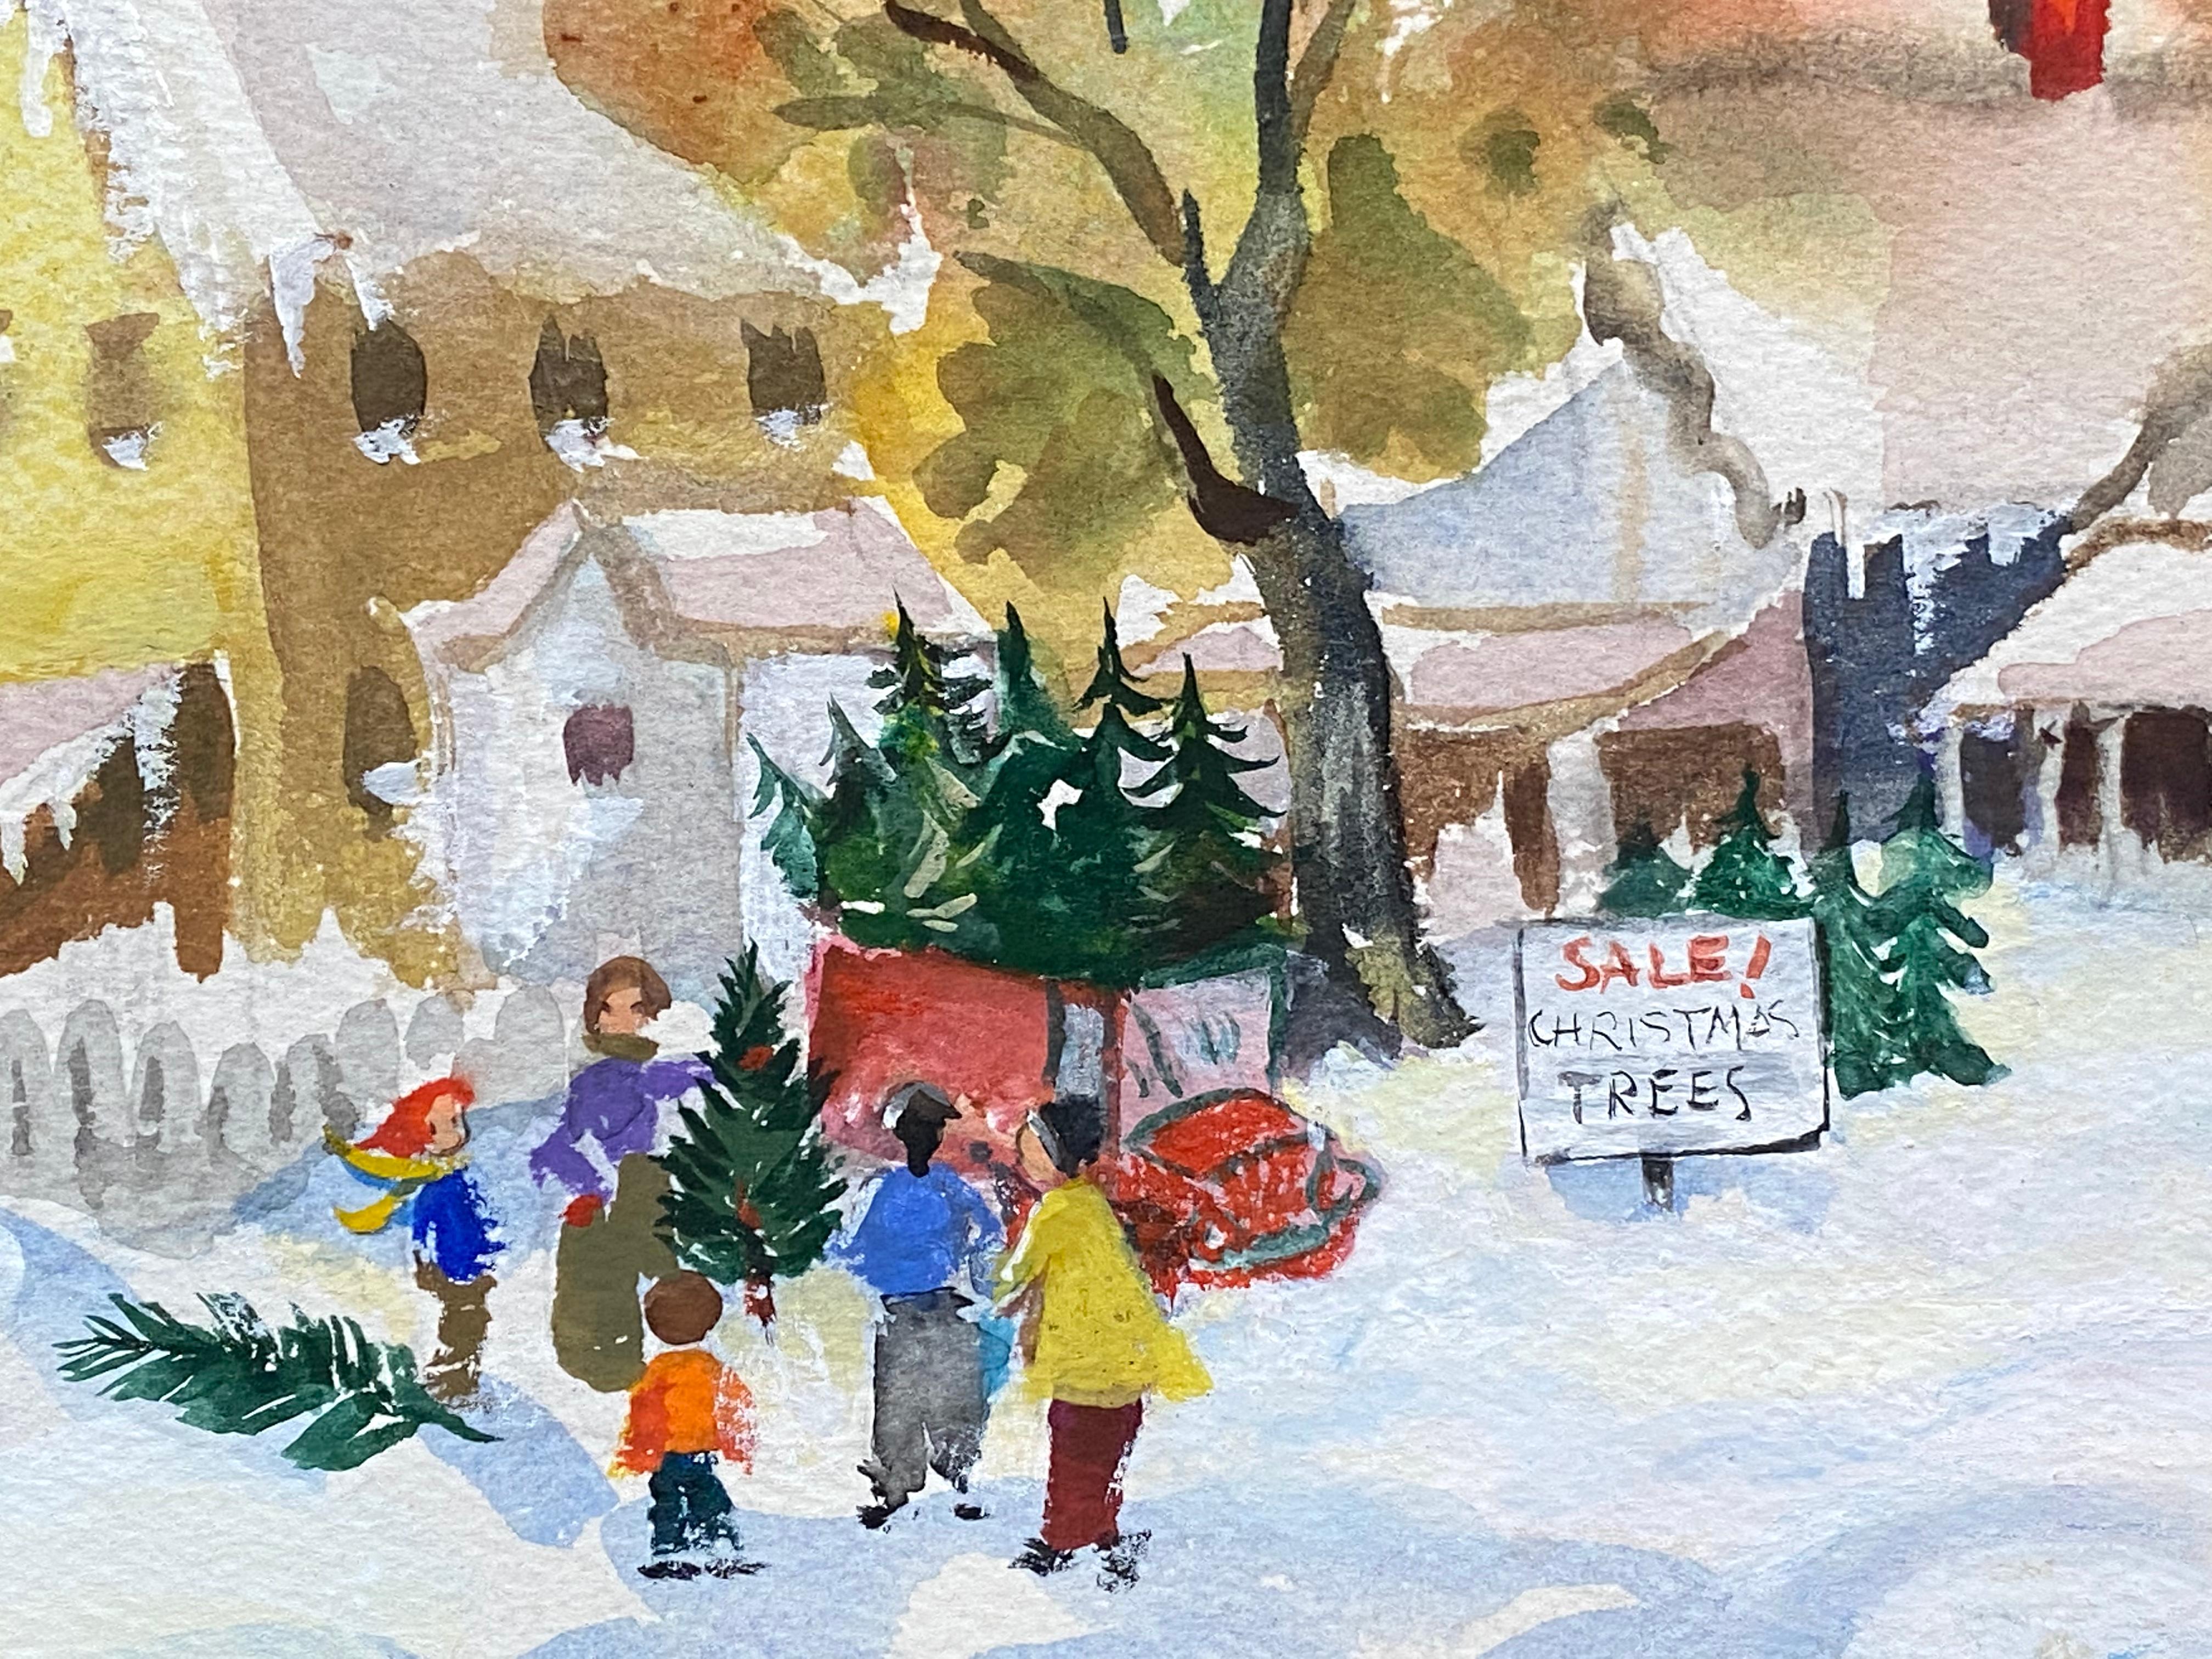 “Christmas Tree Sale” - Art by Maggie Thompson